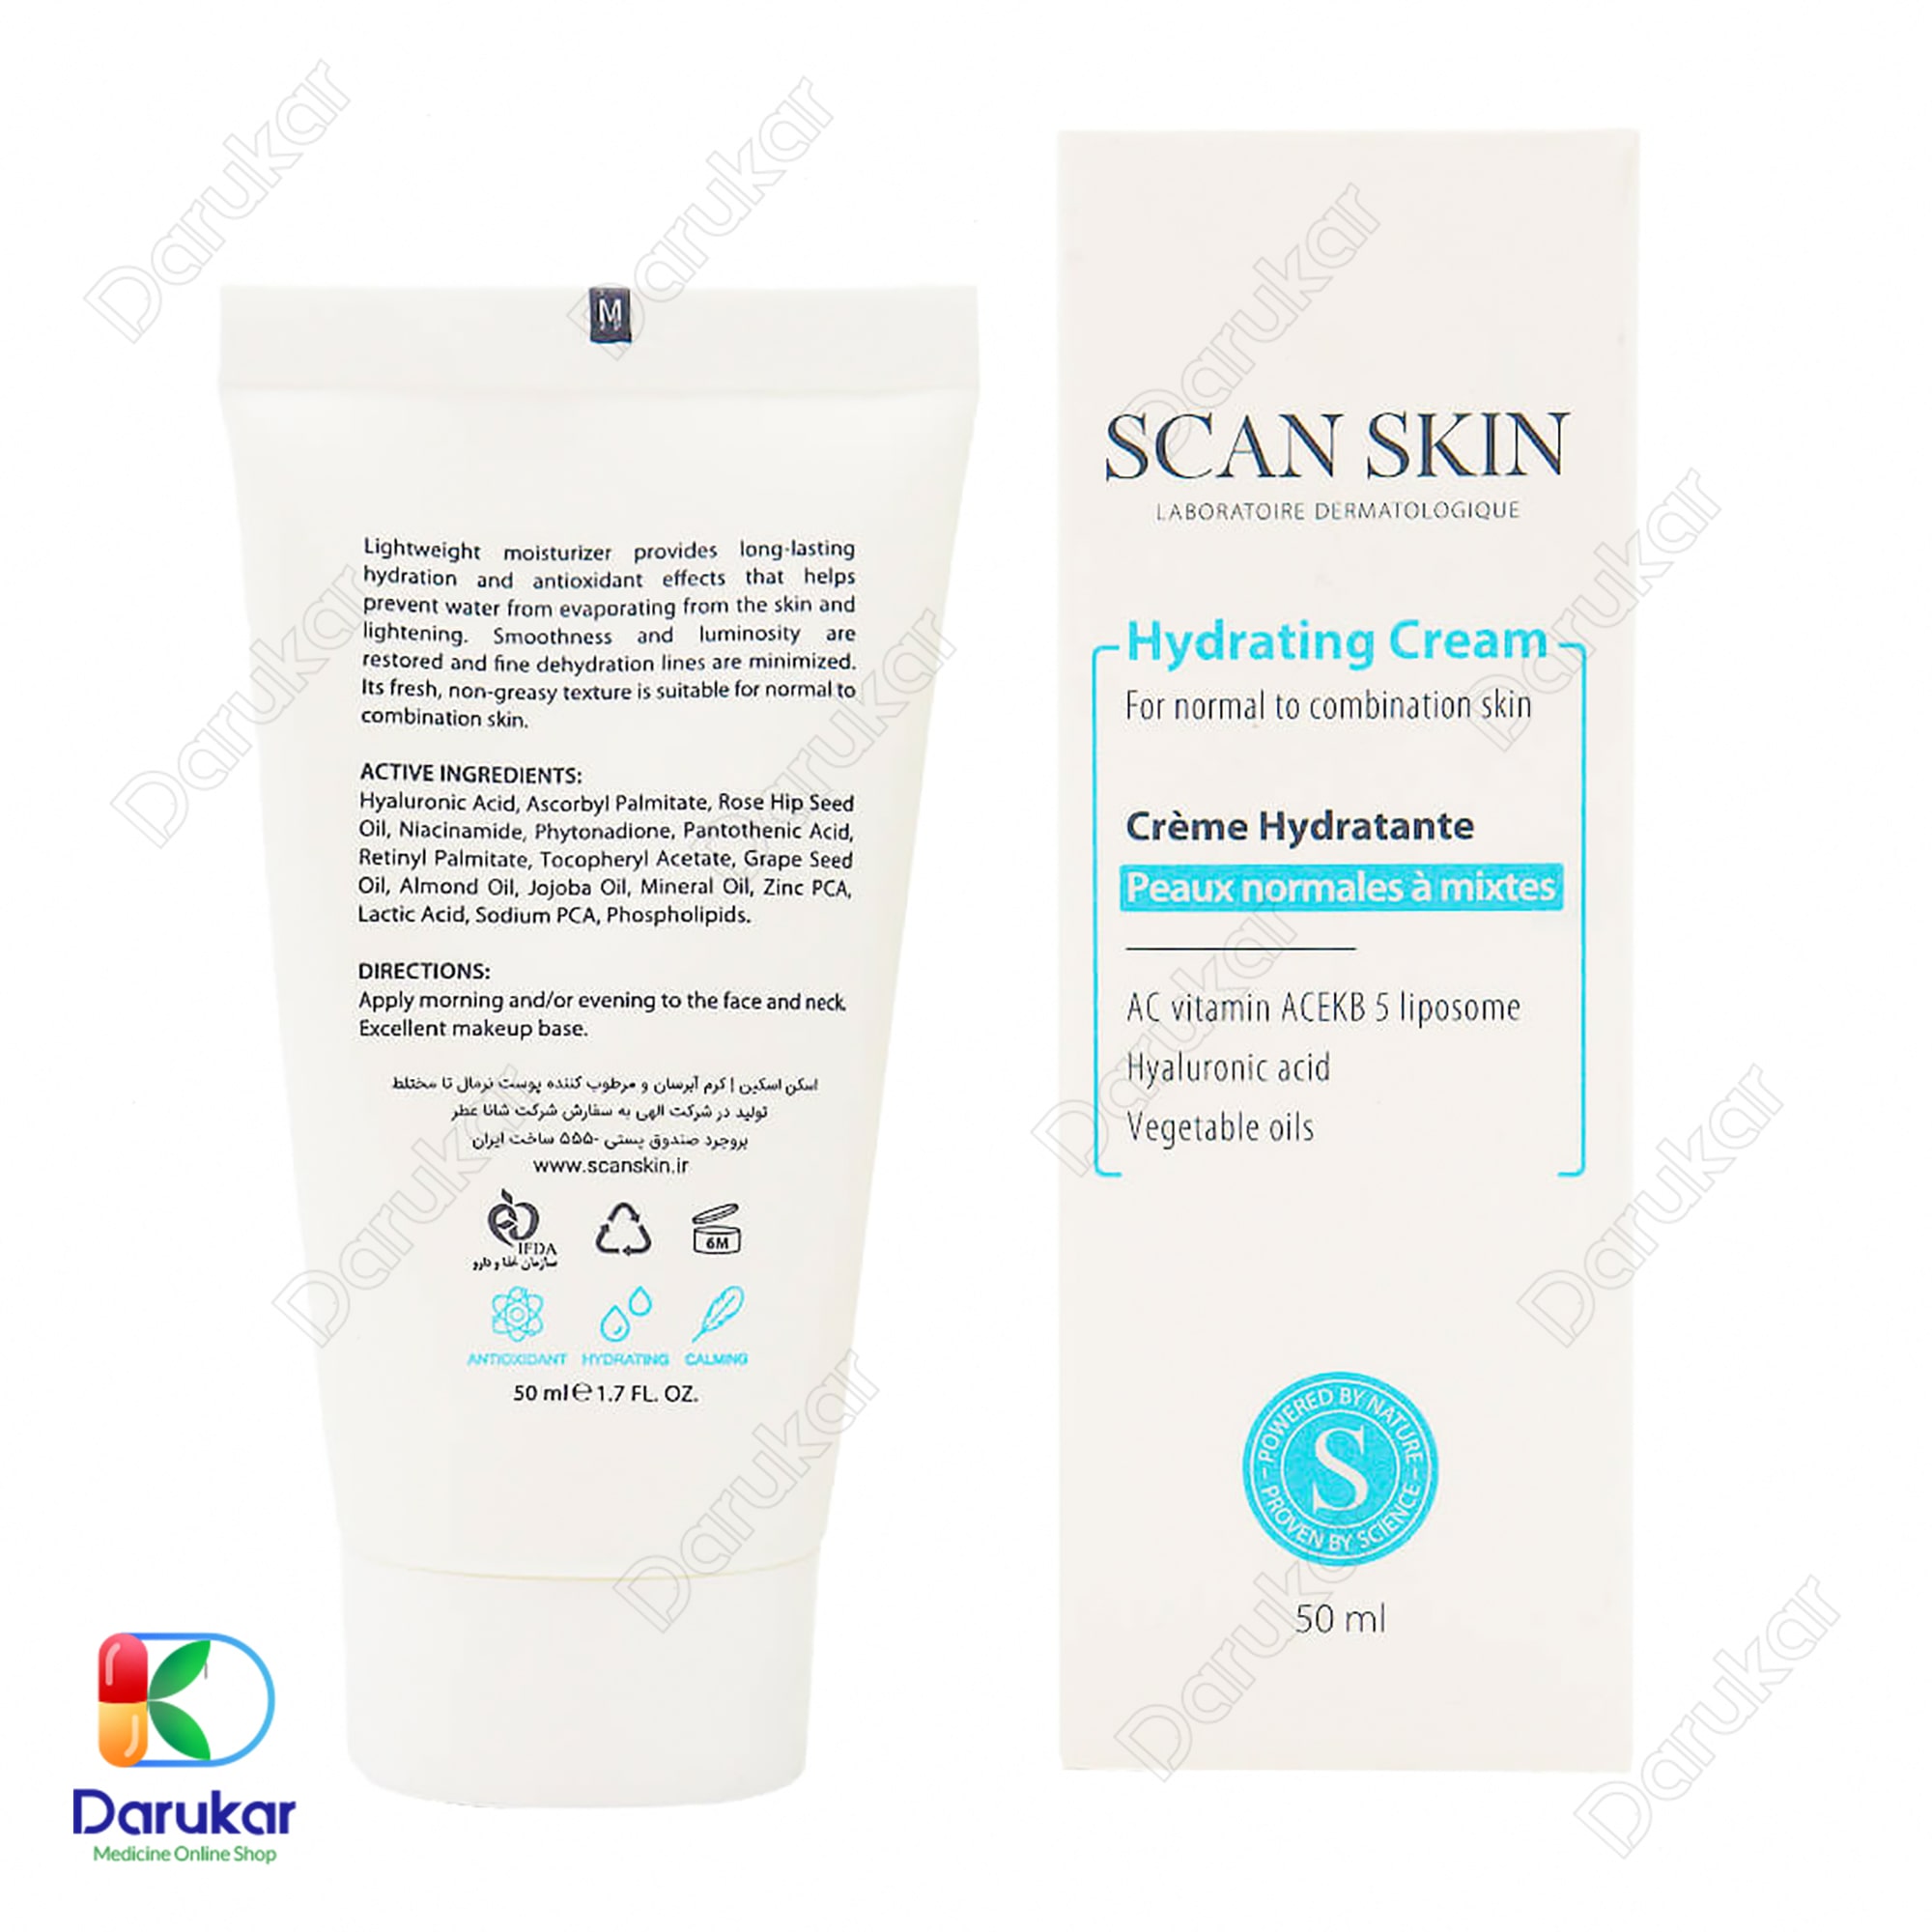 Scan Skin Hydration Cream For Normal to Combination Skin 50 ml 2